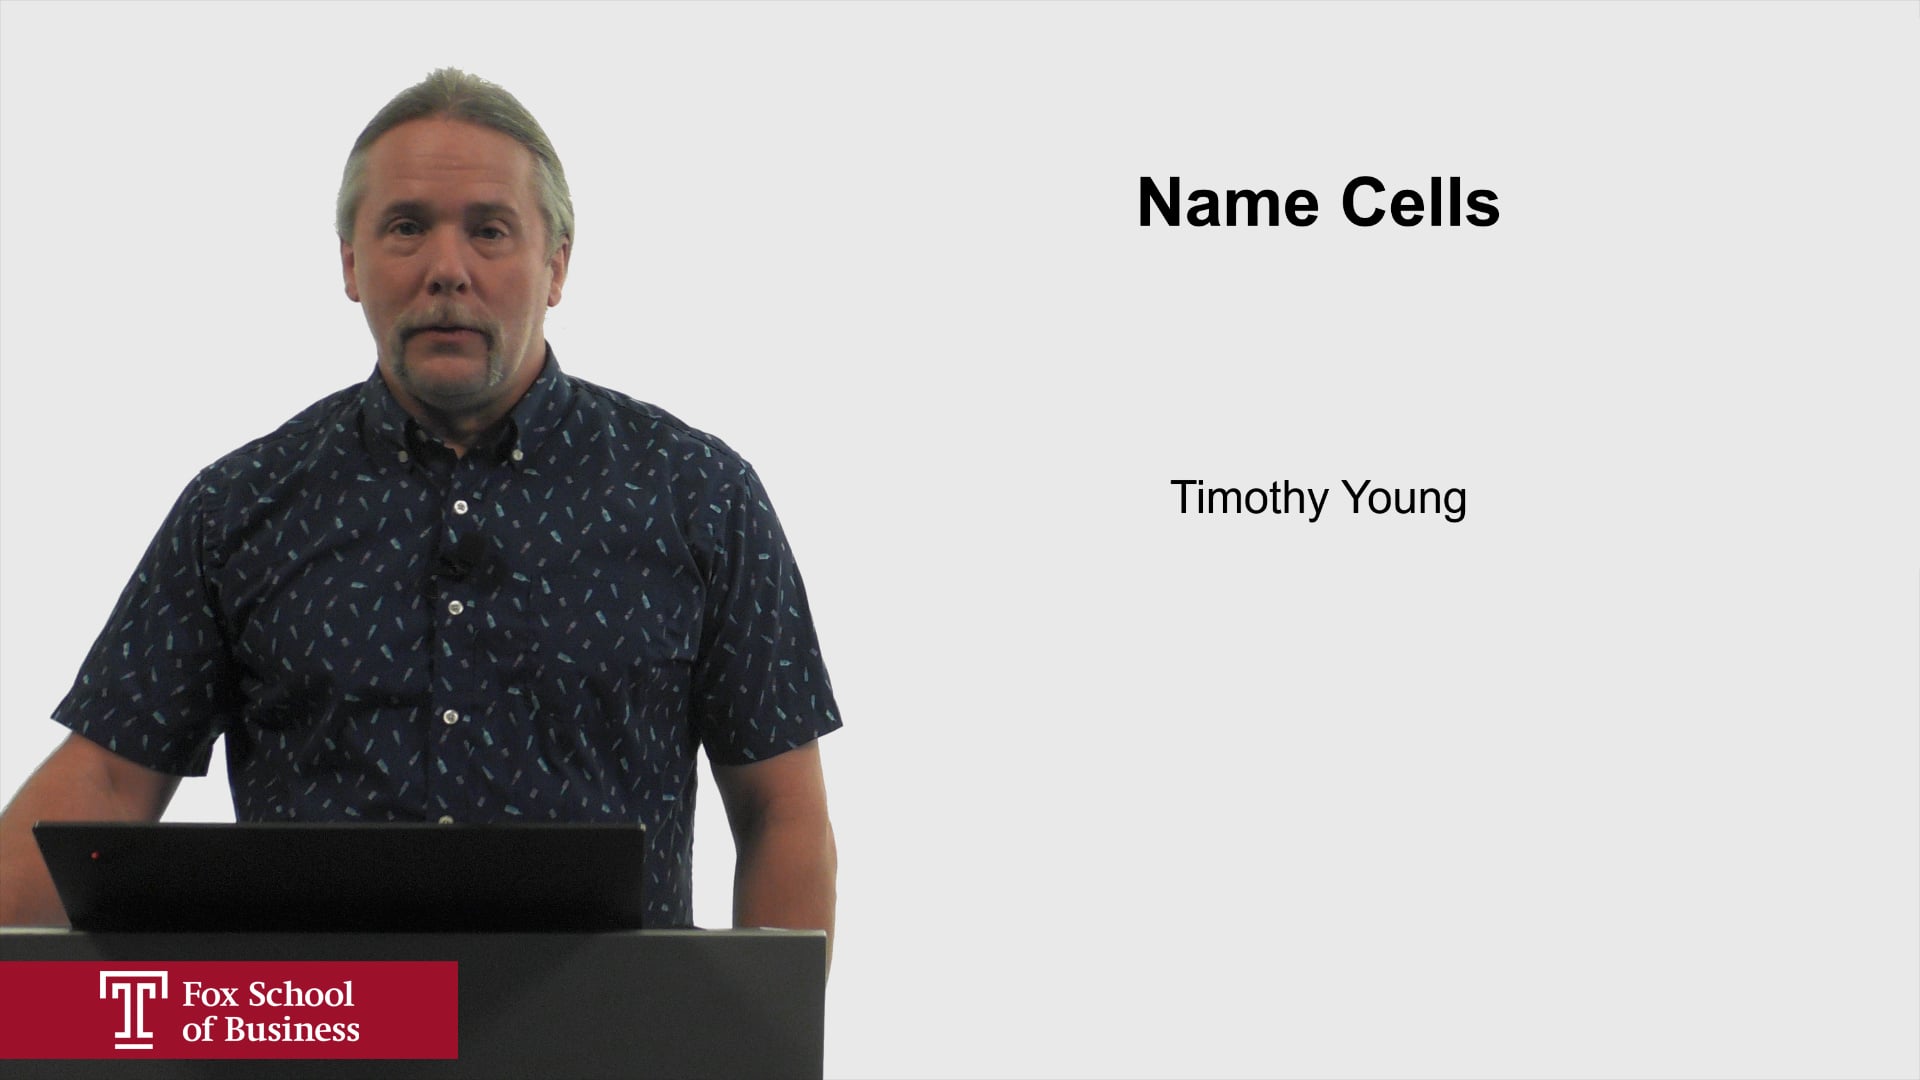 Name Cells